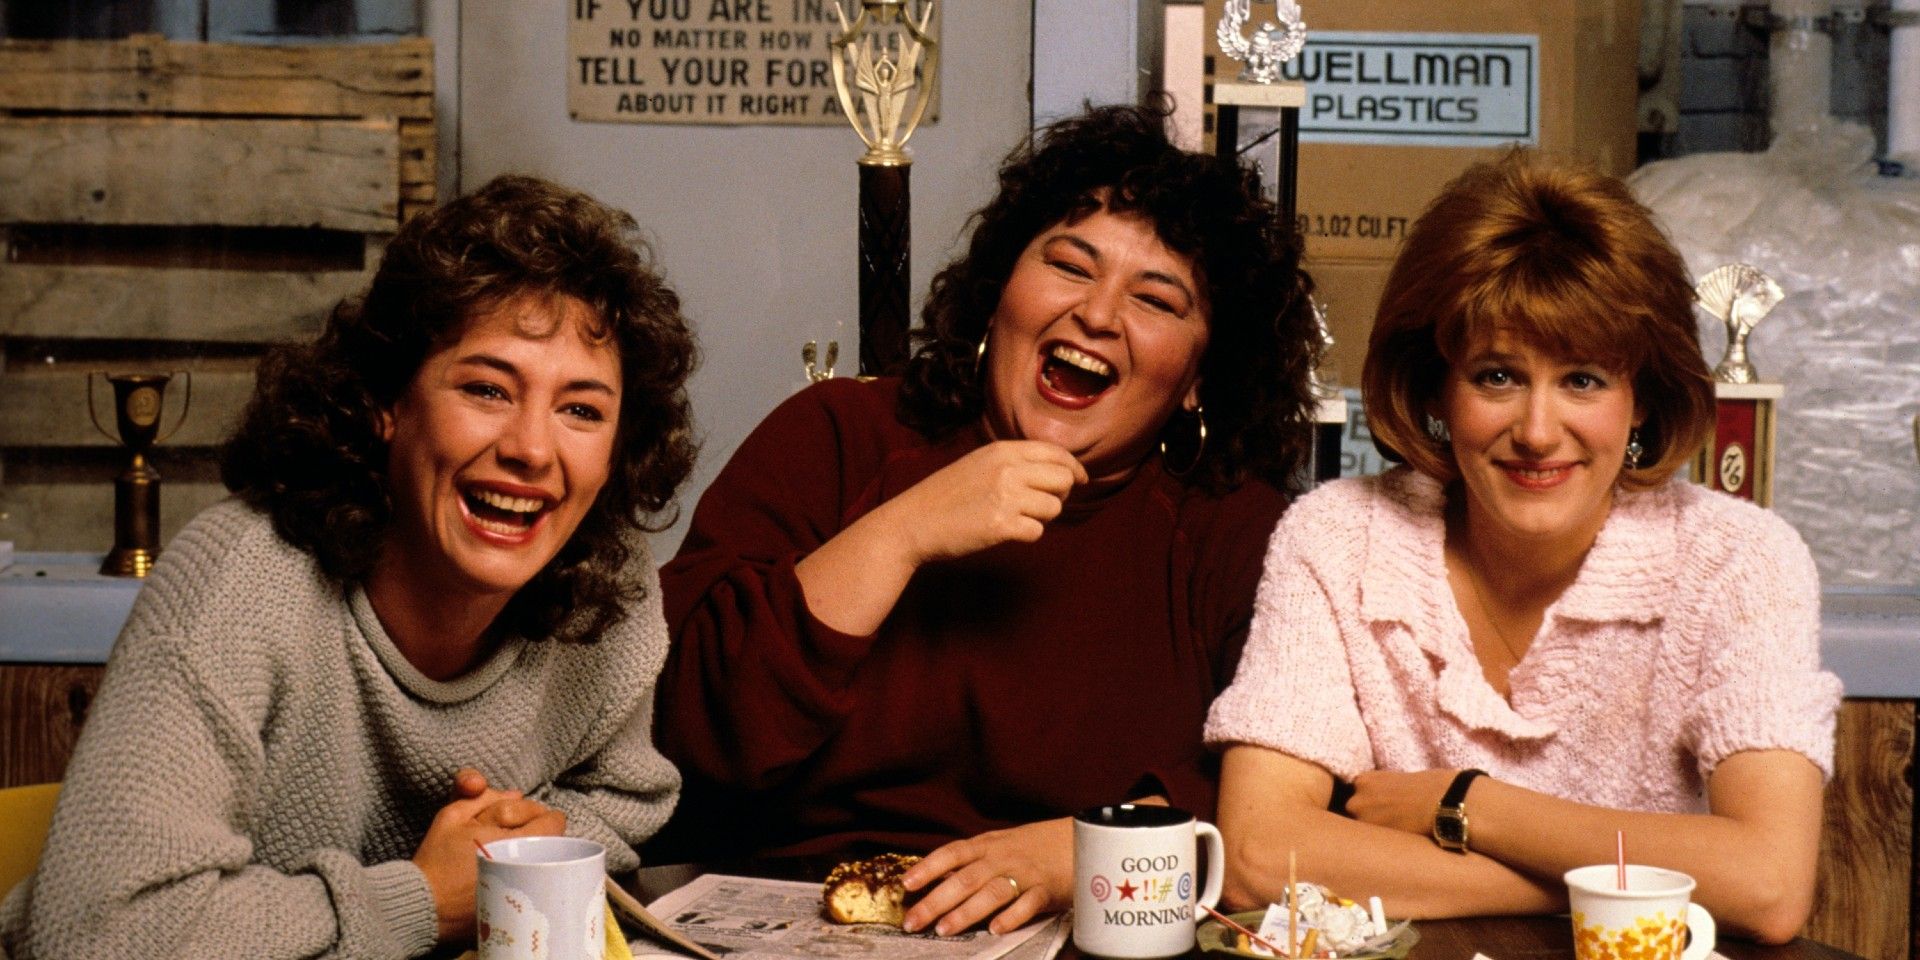 Roseanne laughing with two of her friends (one of whom is Crystal) on Roseanne